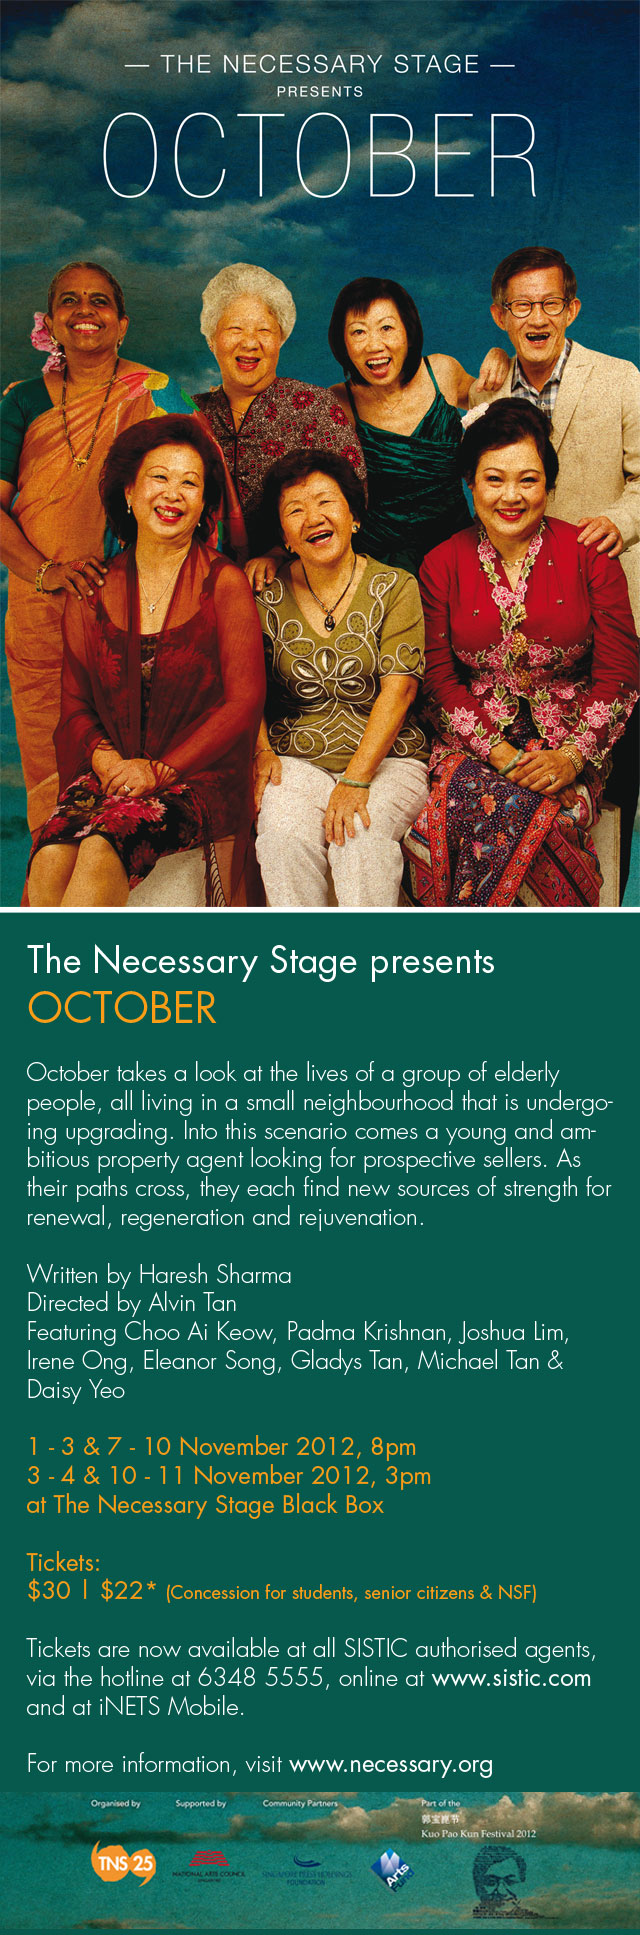 The Necessary Stage presents OCTOBER